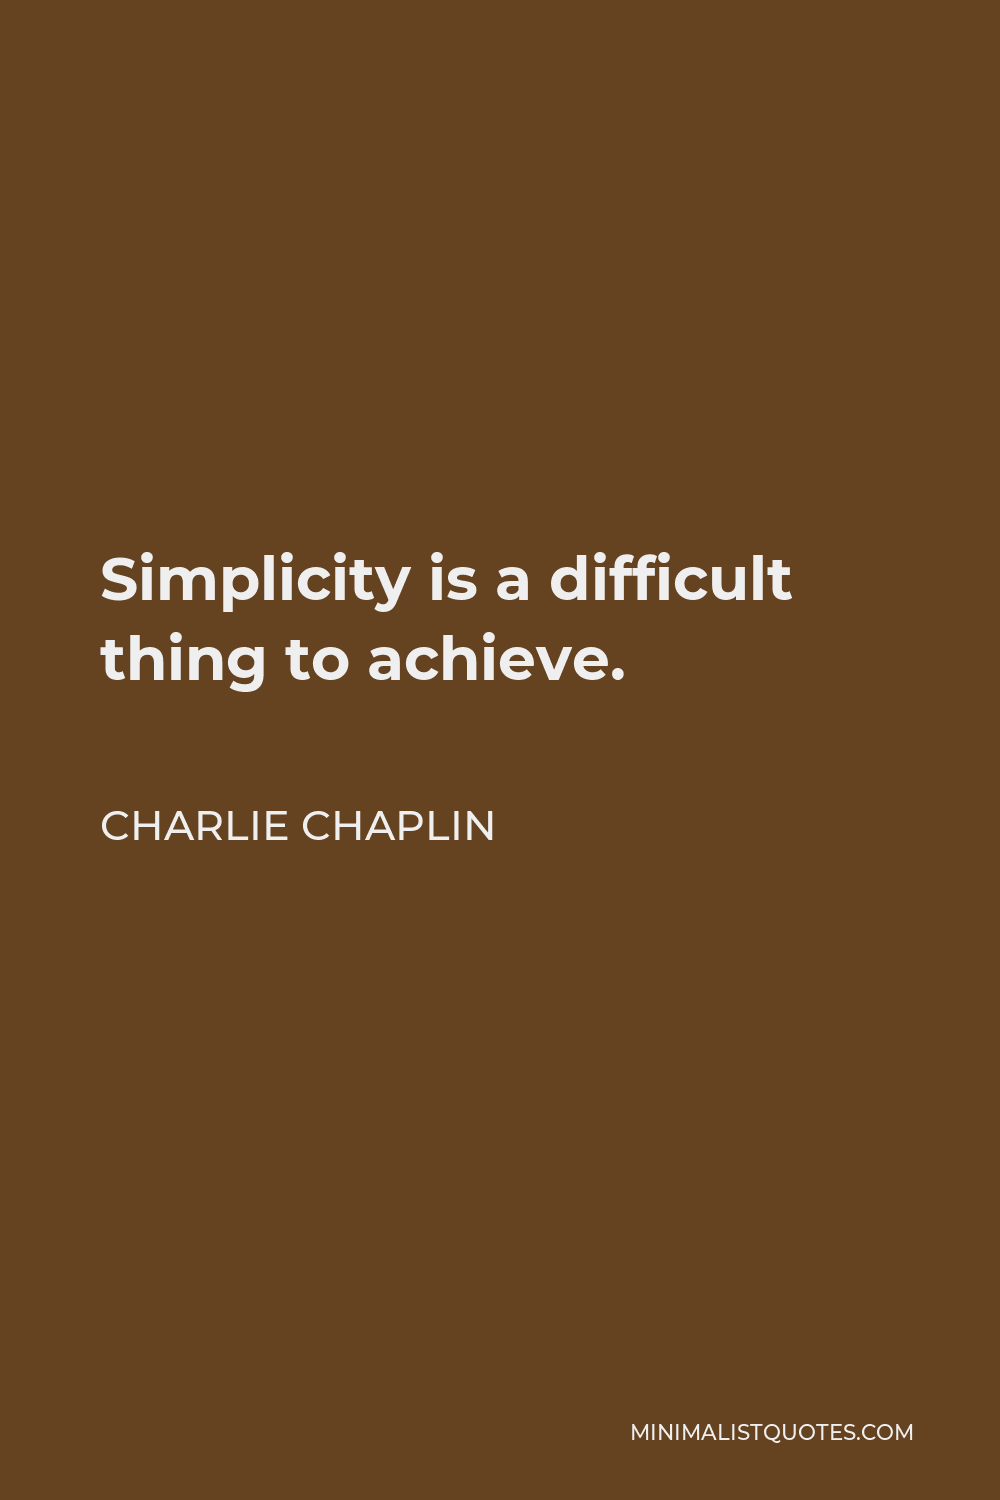 Charlie Chaplin Quote - Simplicity is a difficult thing to achieve.